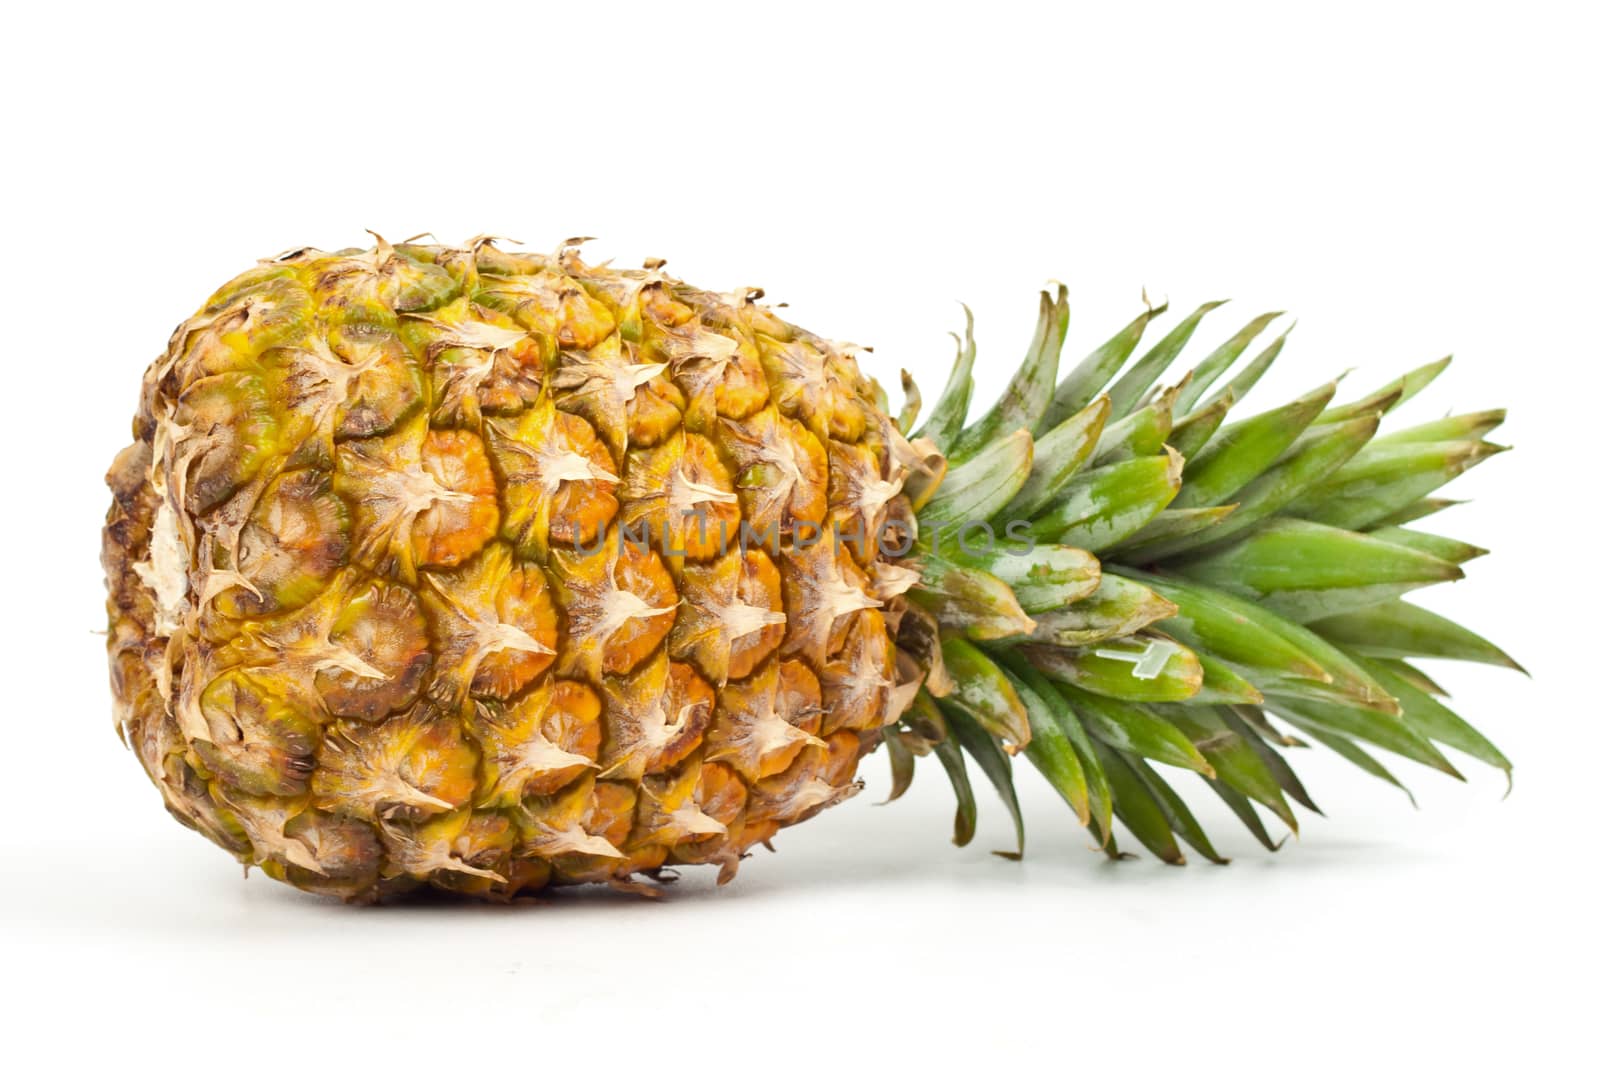 ripe pineapple on a white background